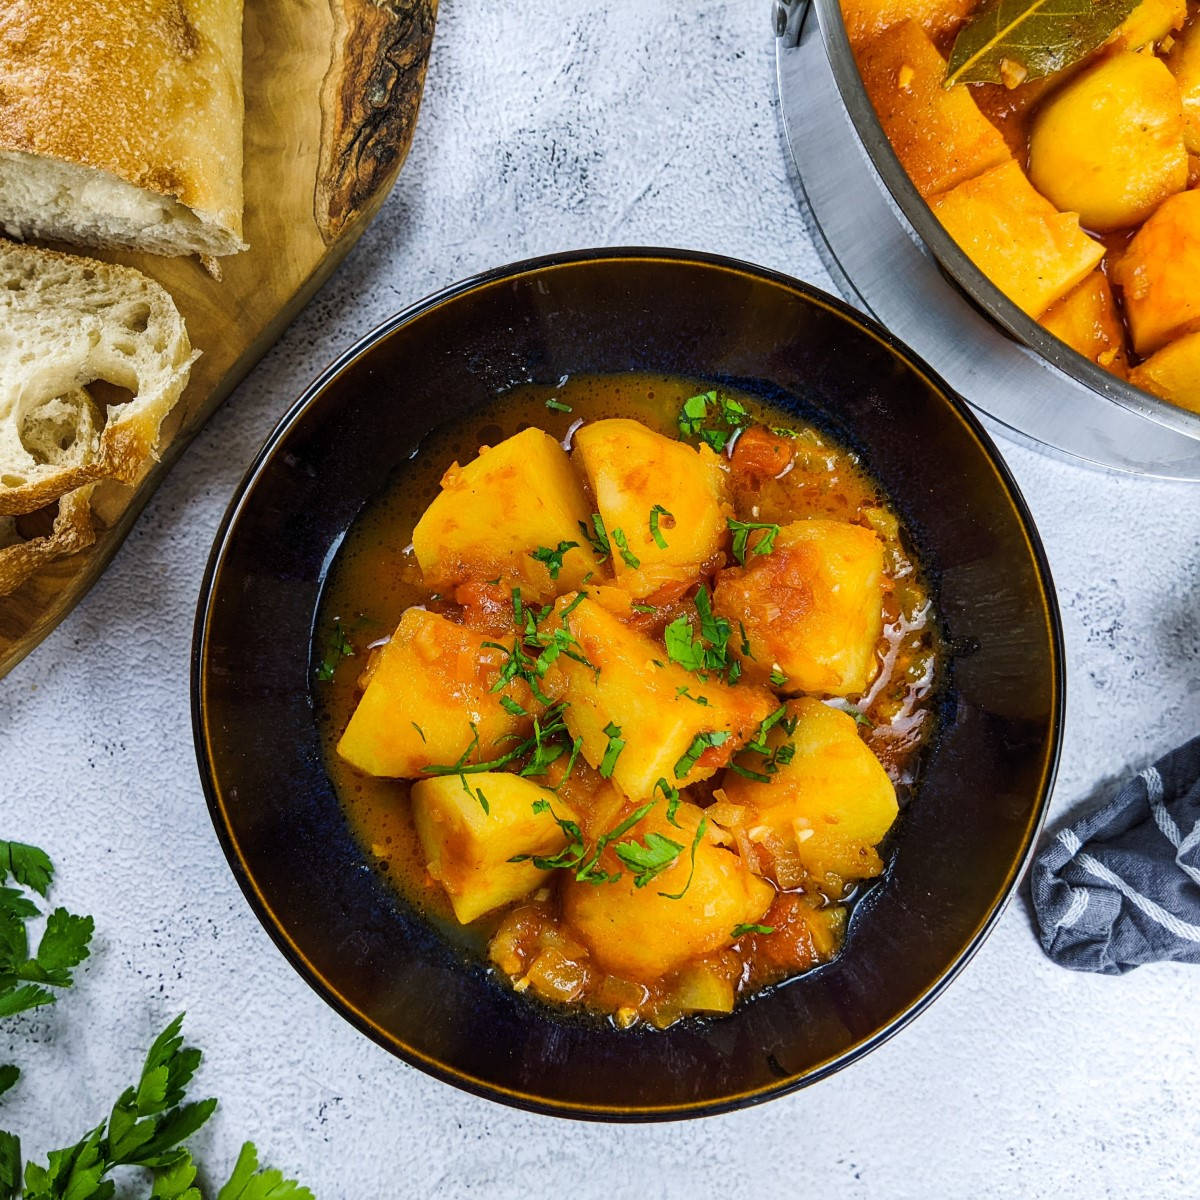 Greek tomato potatoes stew served in black bowl with chopped parsley on top and slices of bread next to it.